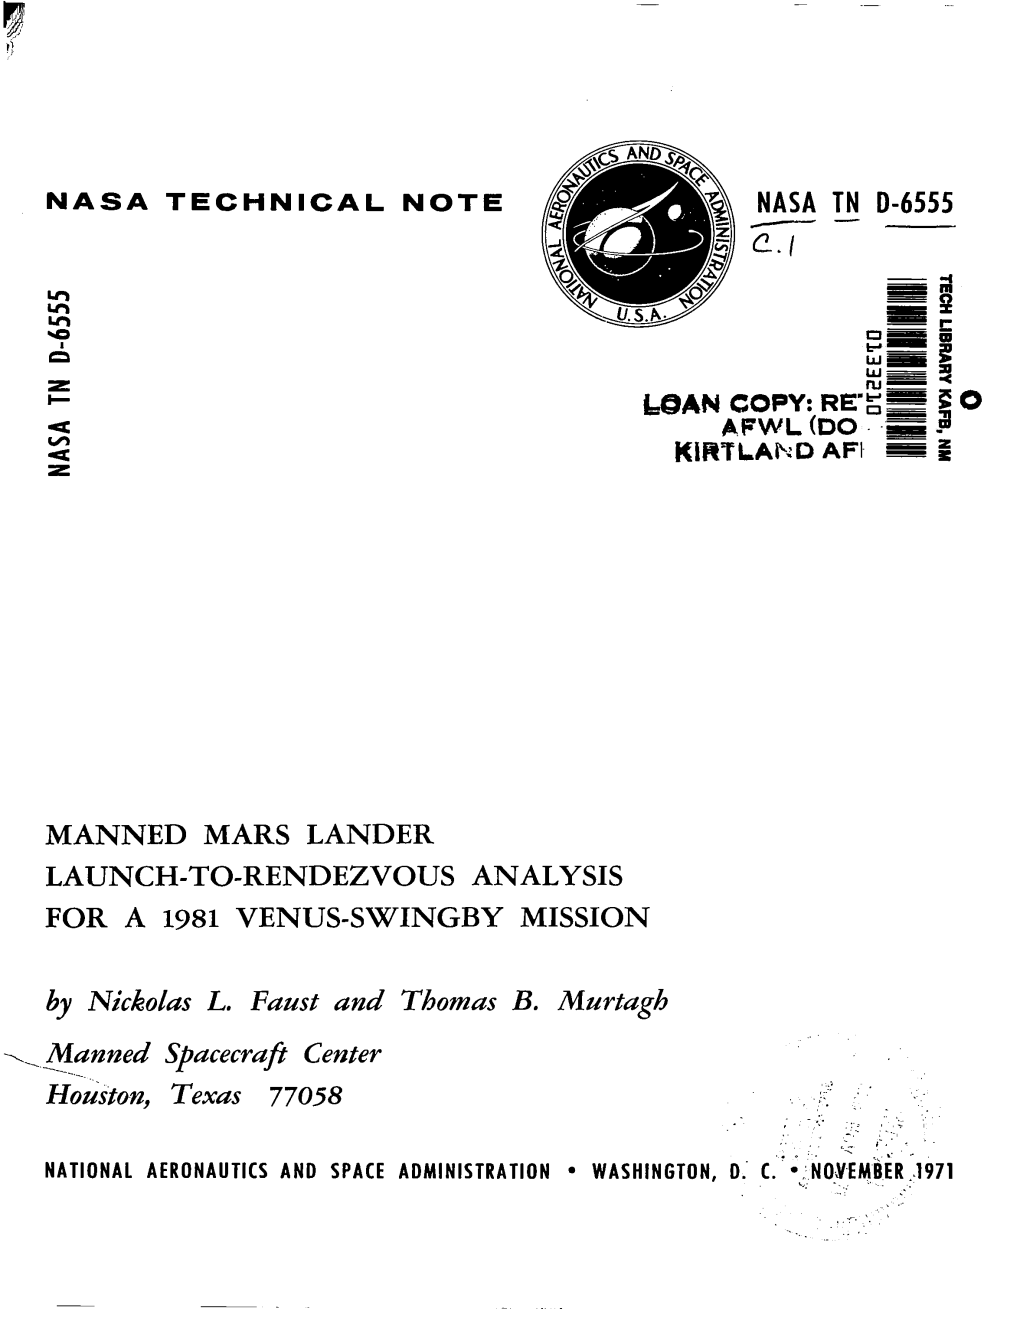 Manned Mars Lander Launch-To-Rendezvous Analysis for a 1981 Venus-Swingby Mission 6